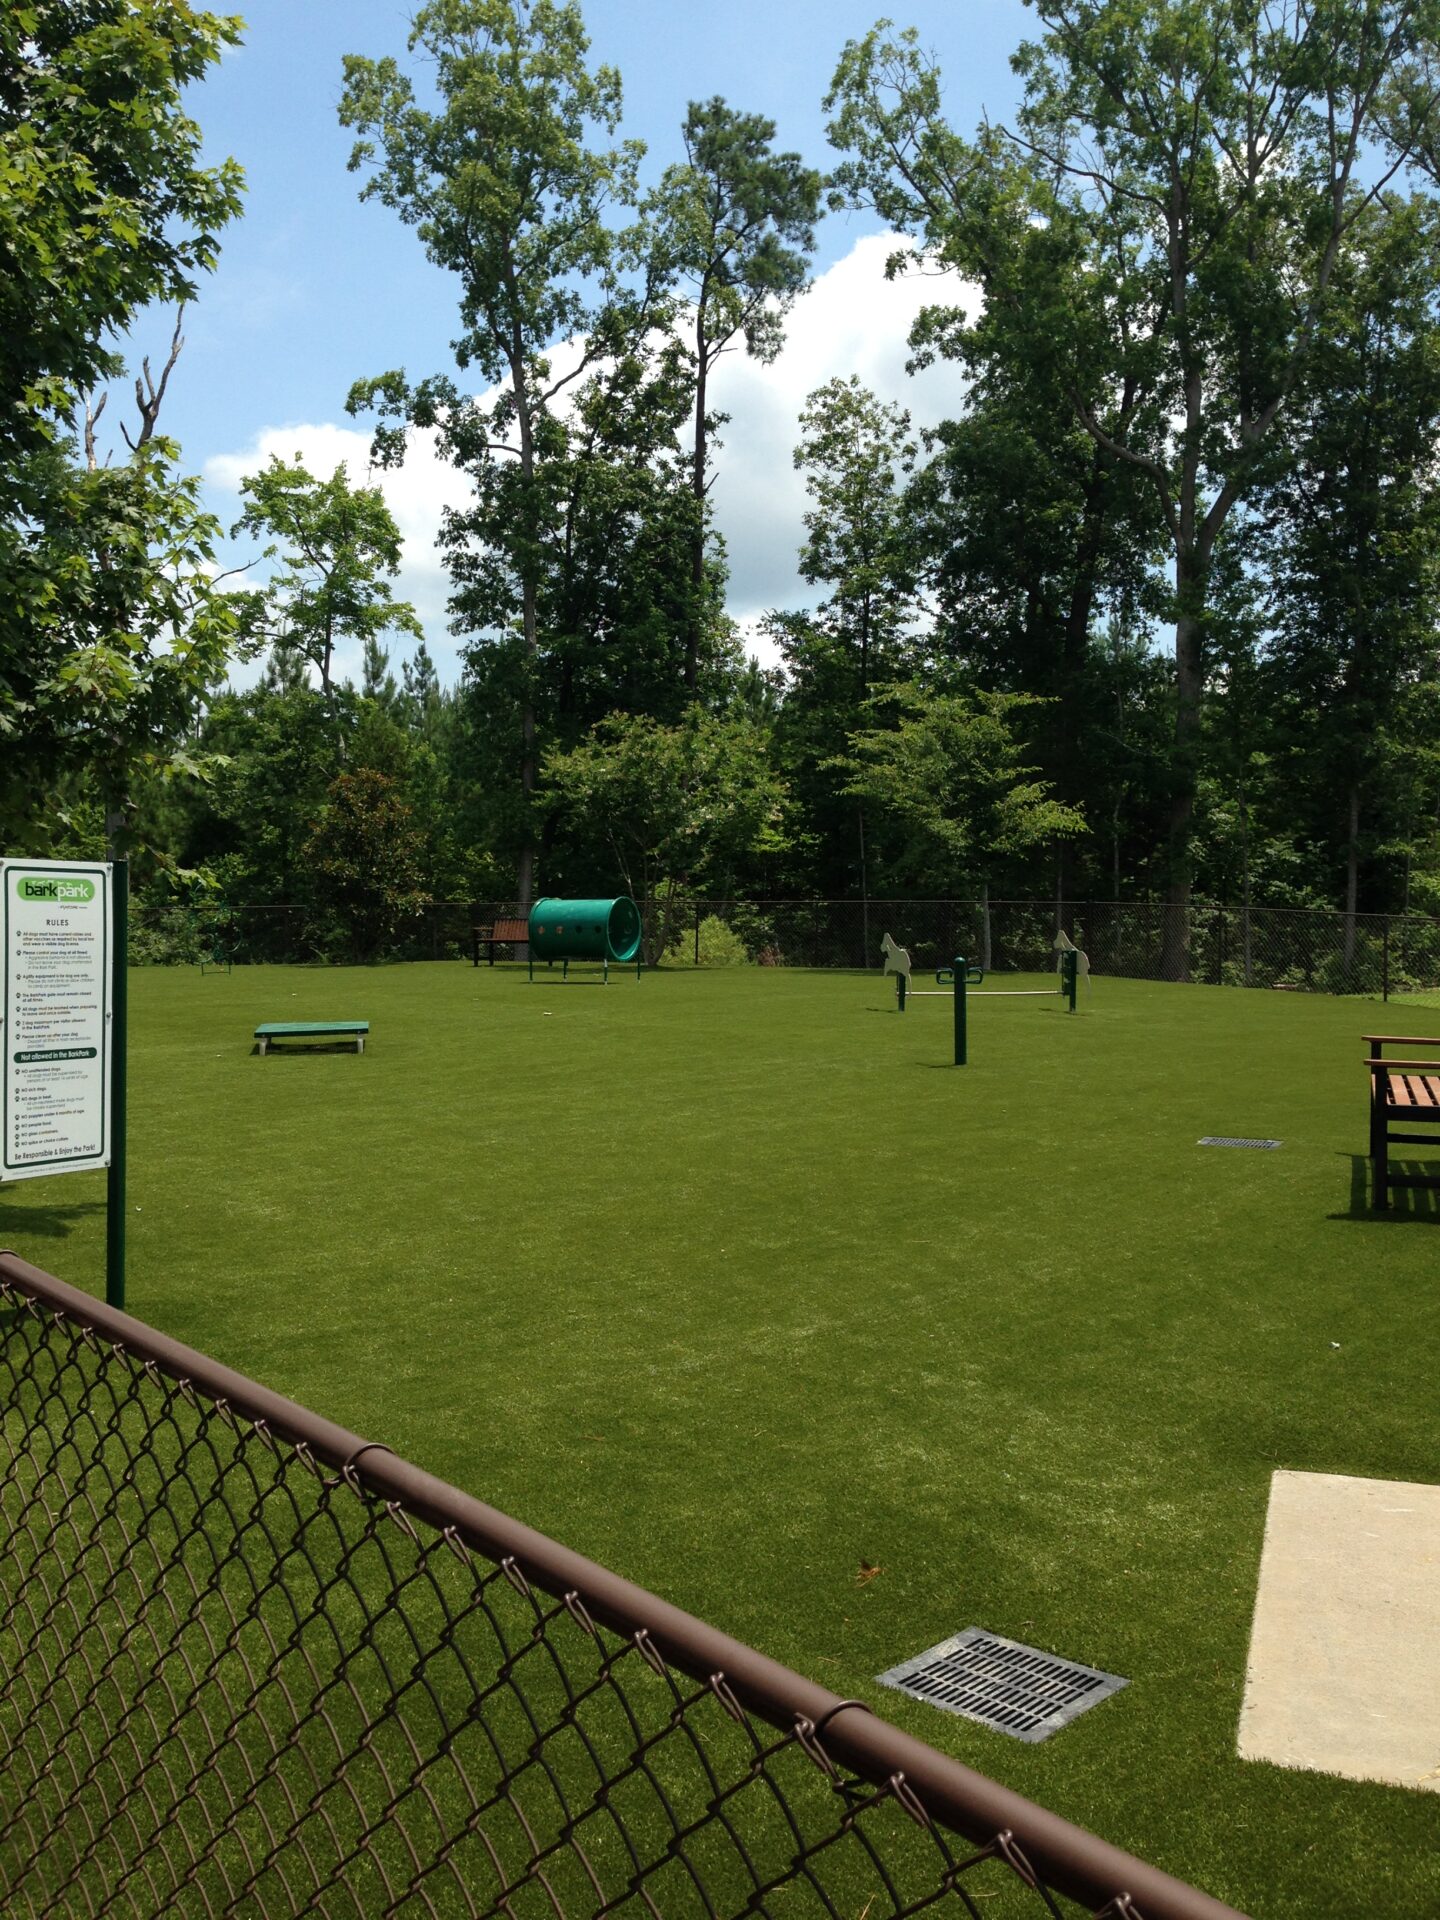 A dog park with artificial grass, surrounded by a chain-link fence, trees in the background, benches, and agility equipment on a sunny day.